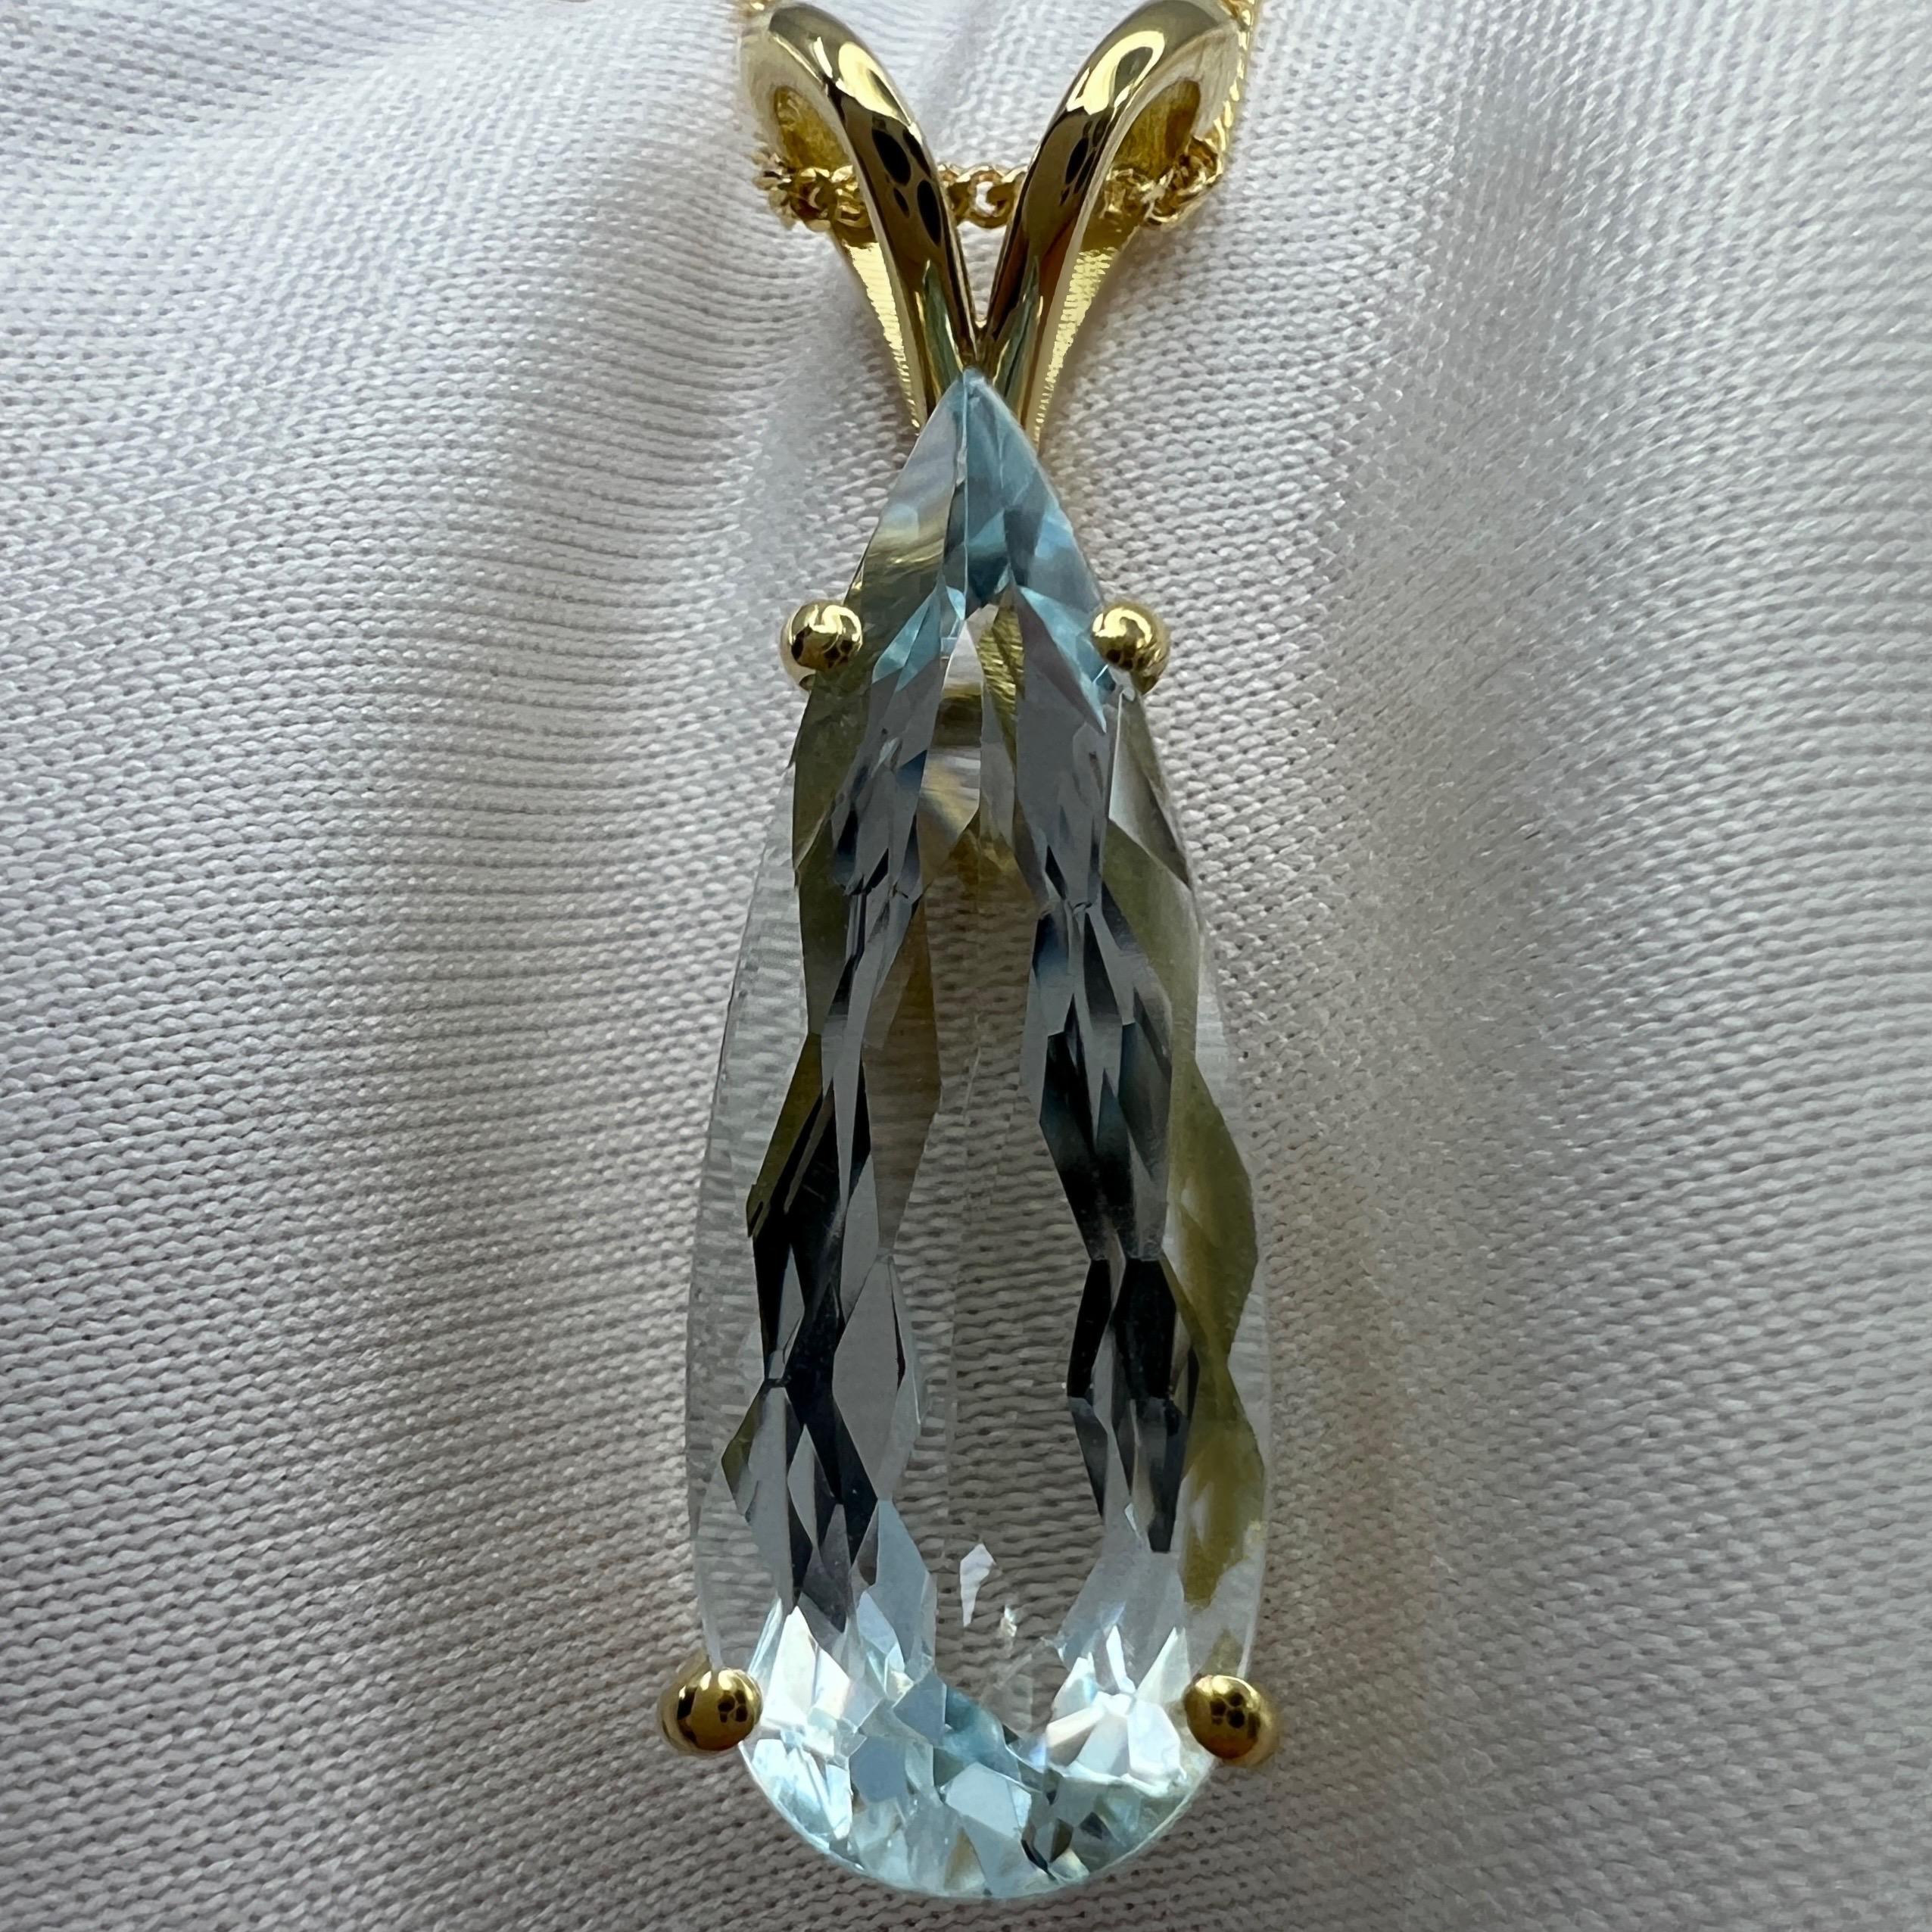 Fine Natural Blue Aquamarine Pendant Necklace.

5.28 Carat aquamarine with a stunning vivid blue colour set in a fine 18k yellow gold solitaire pendant.

The aquamarine has an excellent fancy pear teardrop cut showing lots of brightness and light